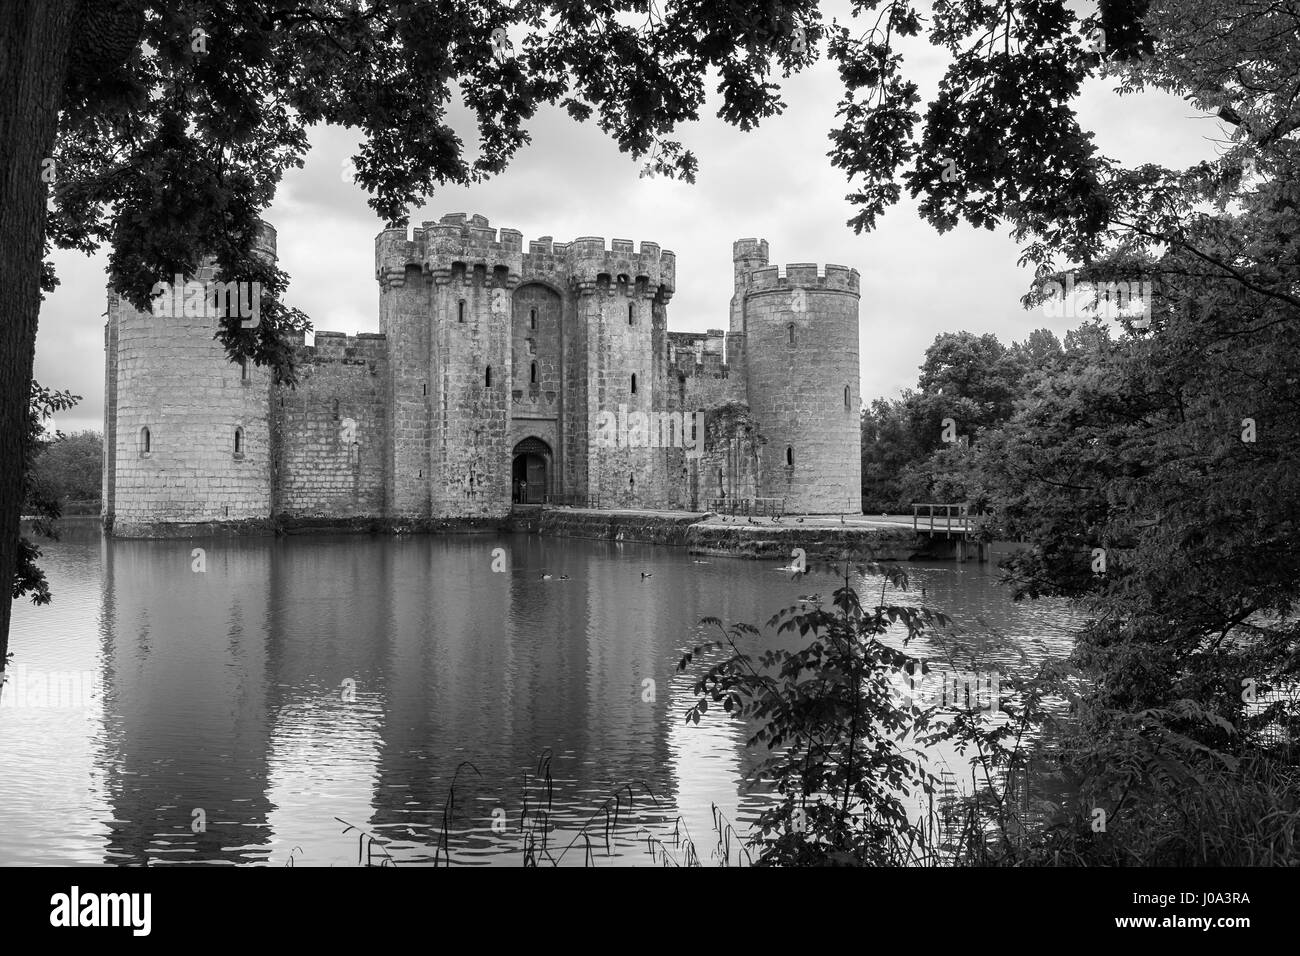 Medieval Bodiam Castle, East Sussex, England, UK: 14th century moated castle ruins.  Black and white version Stock Photo